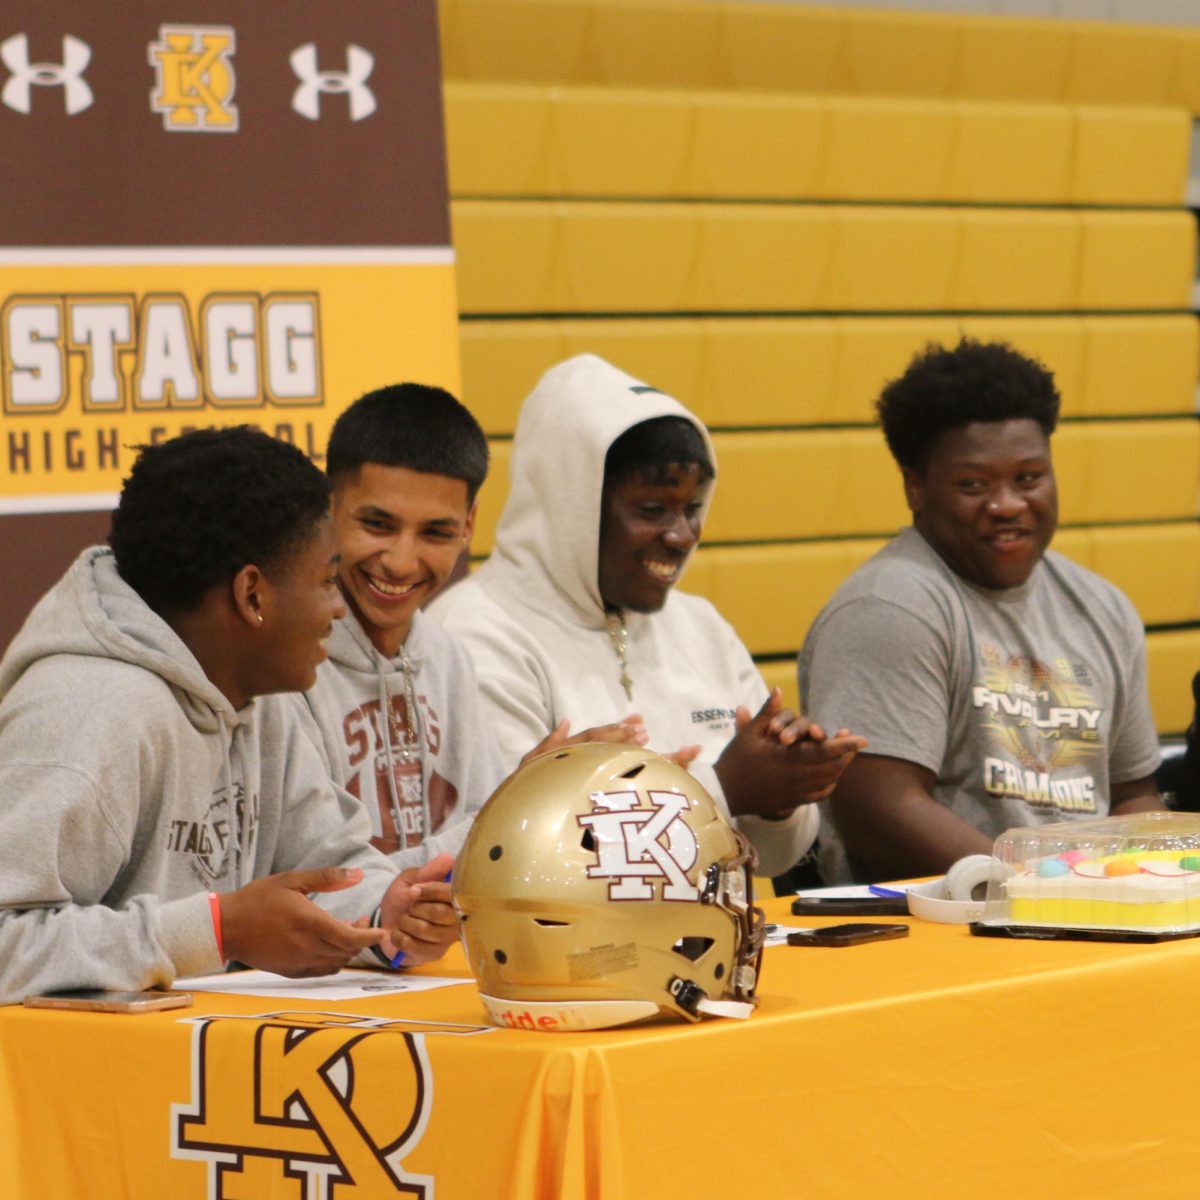 The four players exchange smiles during during the event.